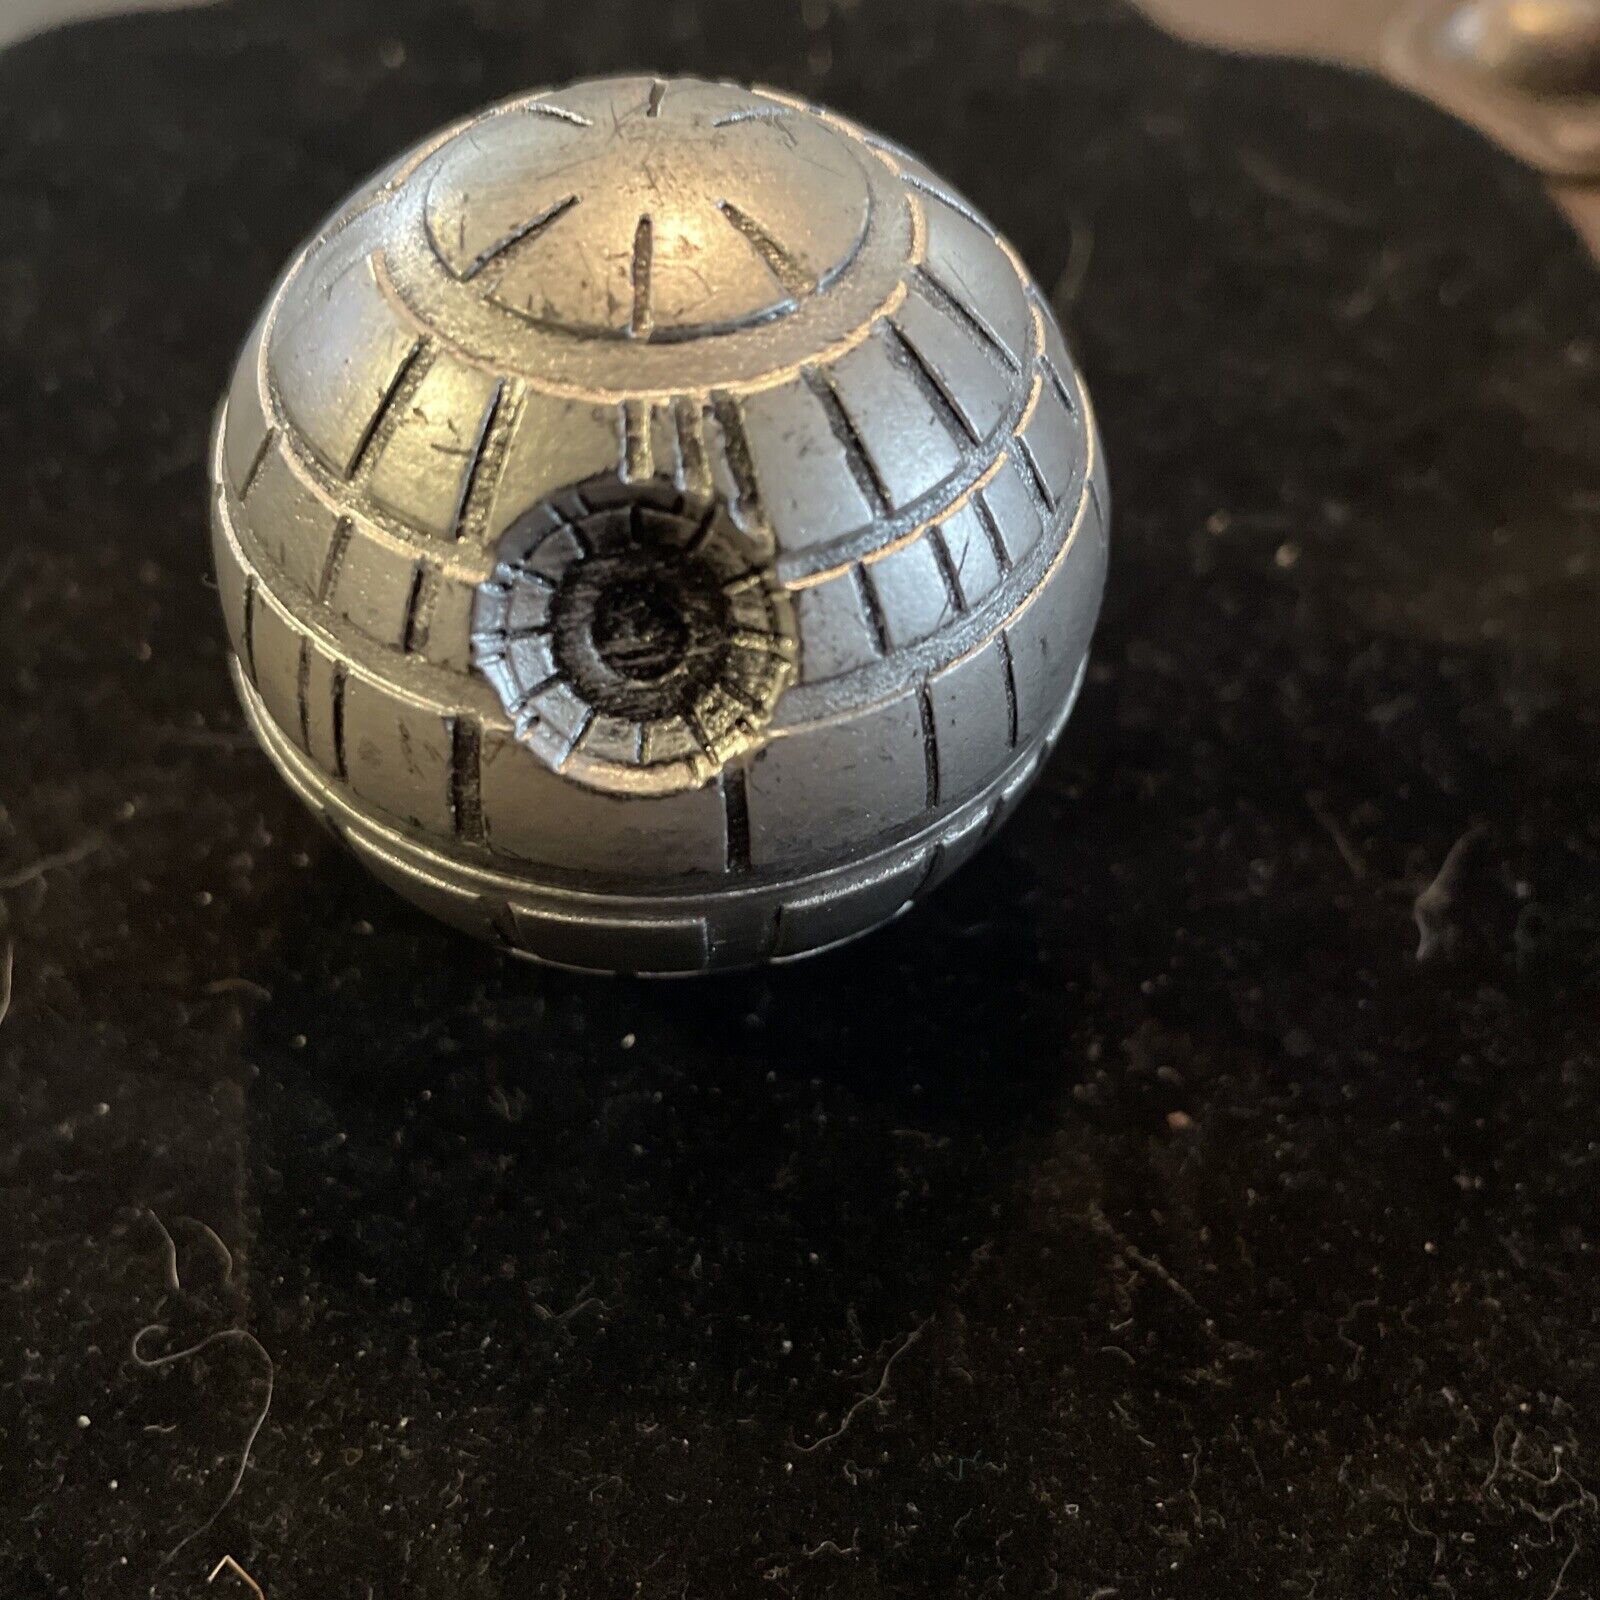 Death Star Tobacco Grinder Must Have Show Your Friends. Magnetic Fit. Go Wars